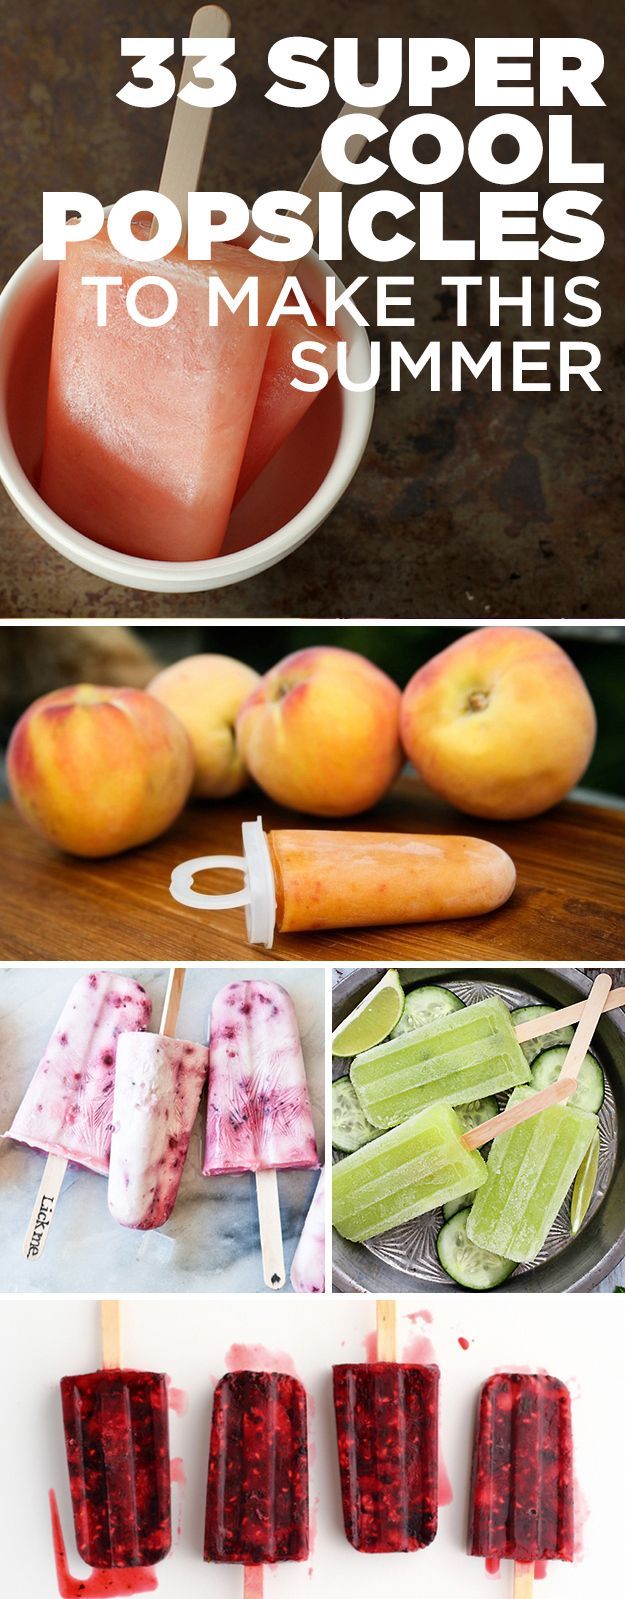 33 Super-Cool Popsicles To Make This Summer – BuzzFeed